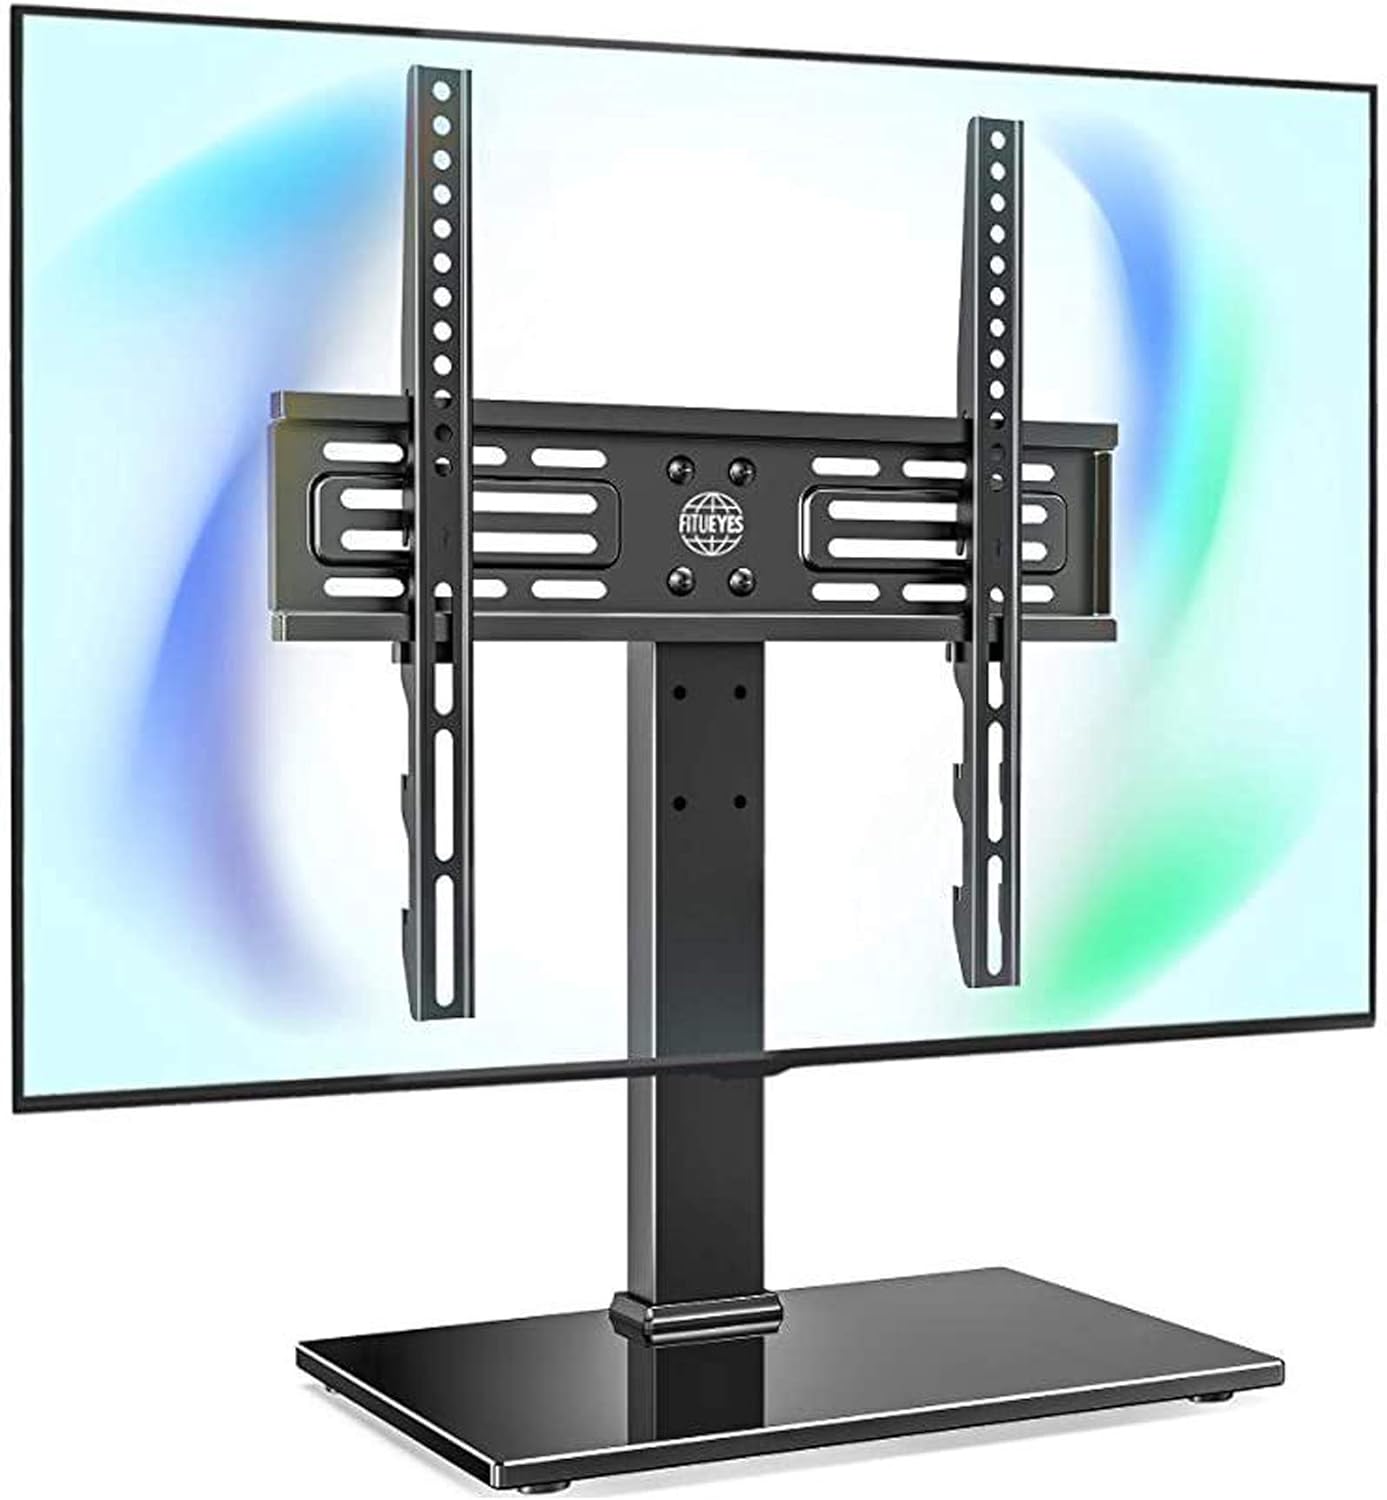 FITUEYES Universal TV Stand Table Top TV Stand for 27-55 inch TVS Height Adjustable TV Stand Mount, Glass Base, Black